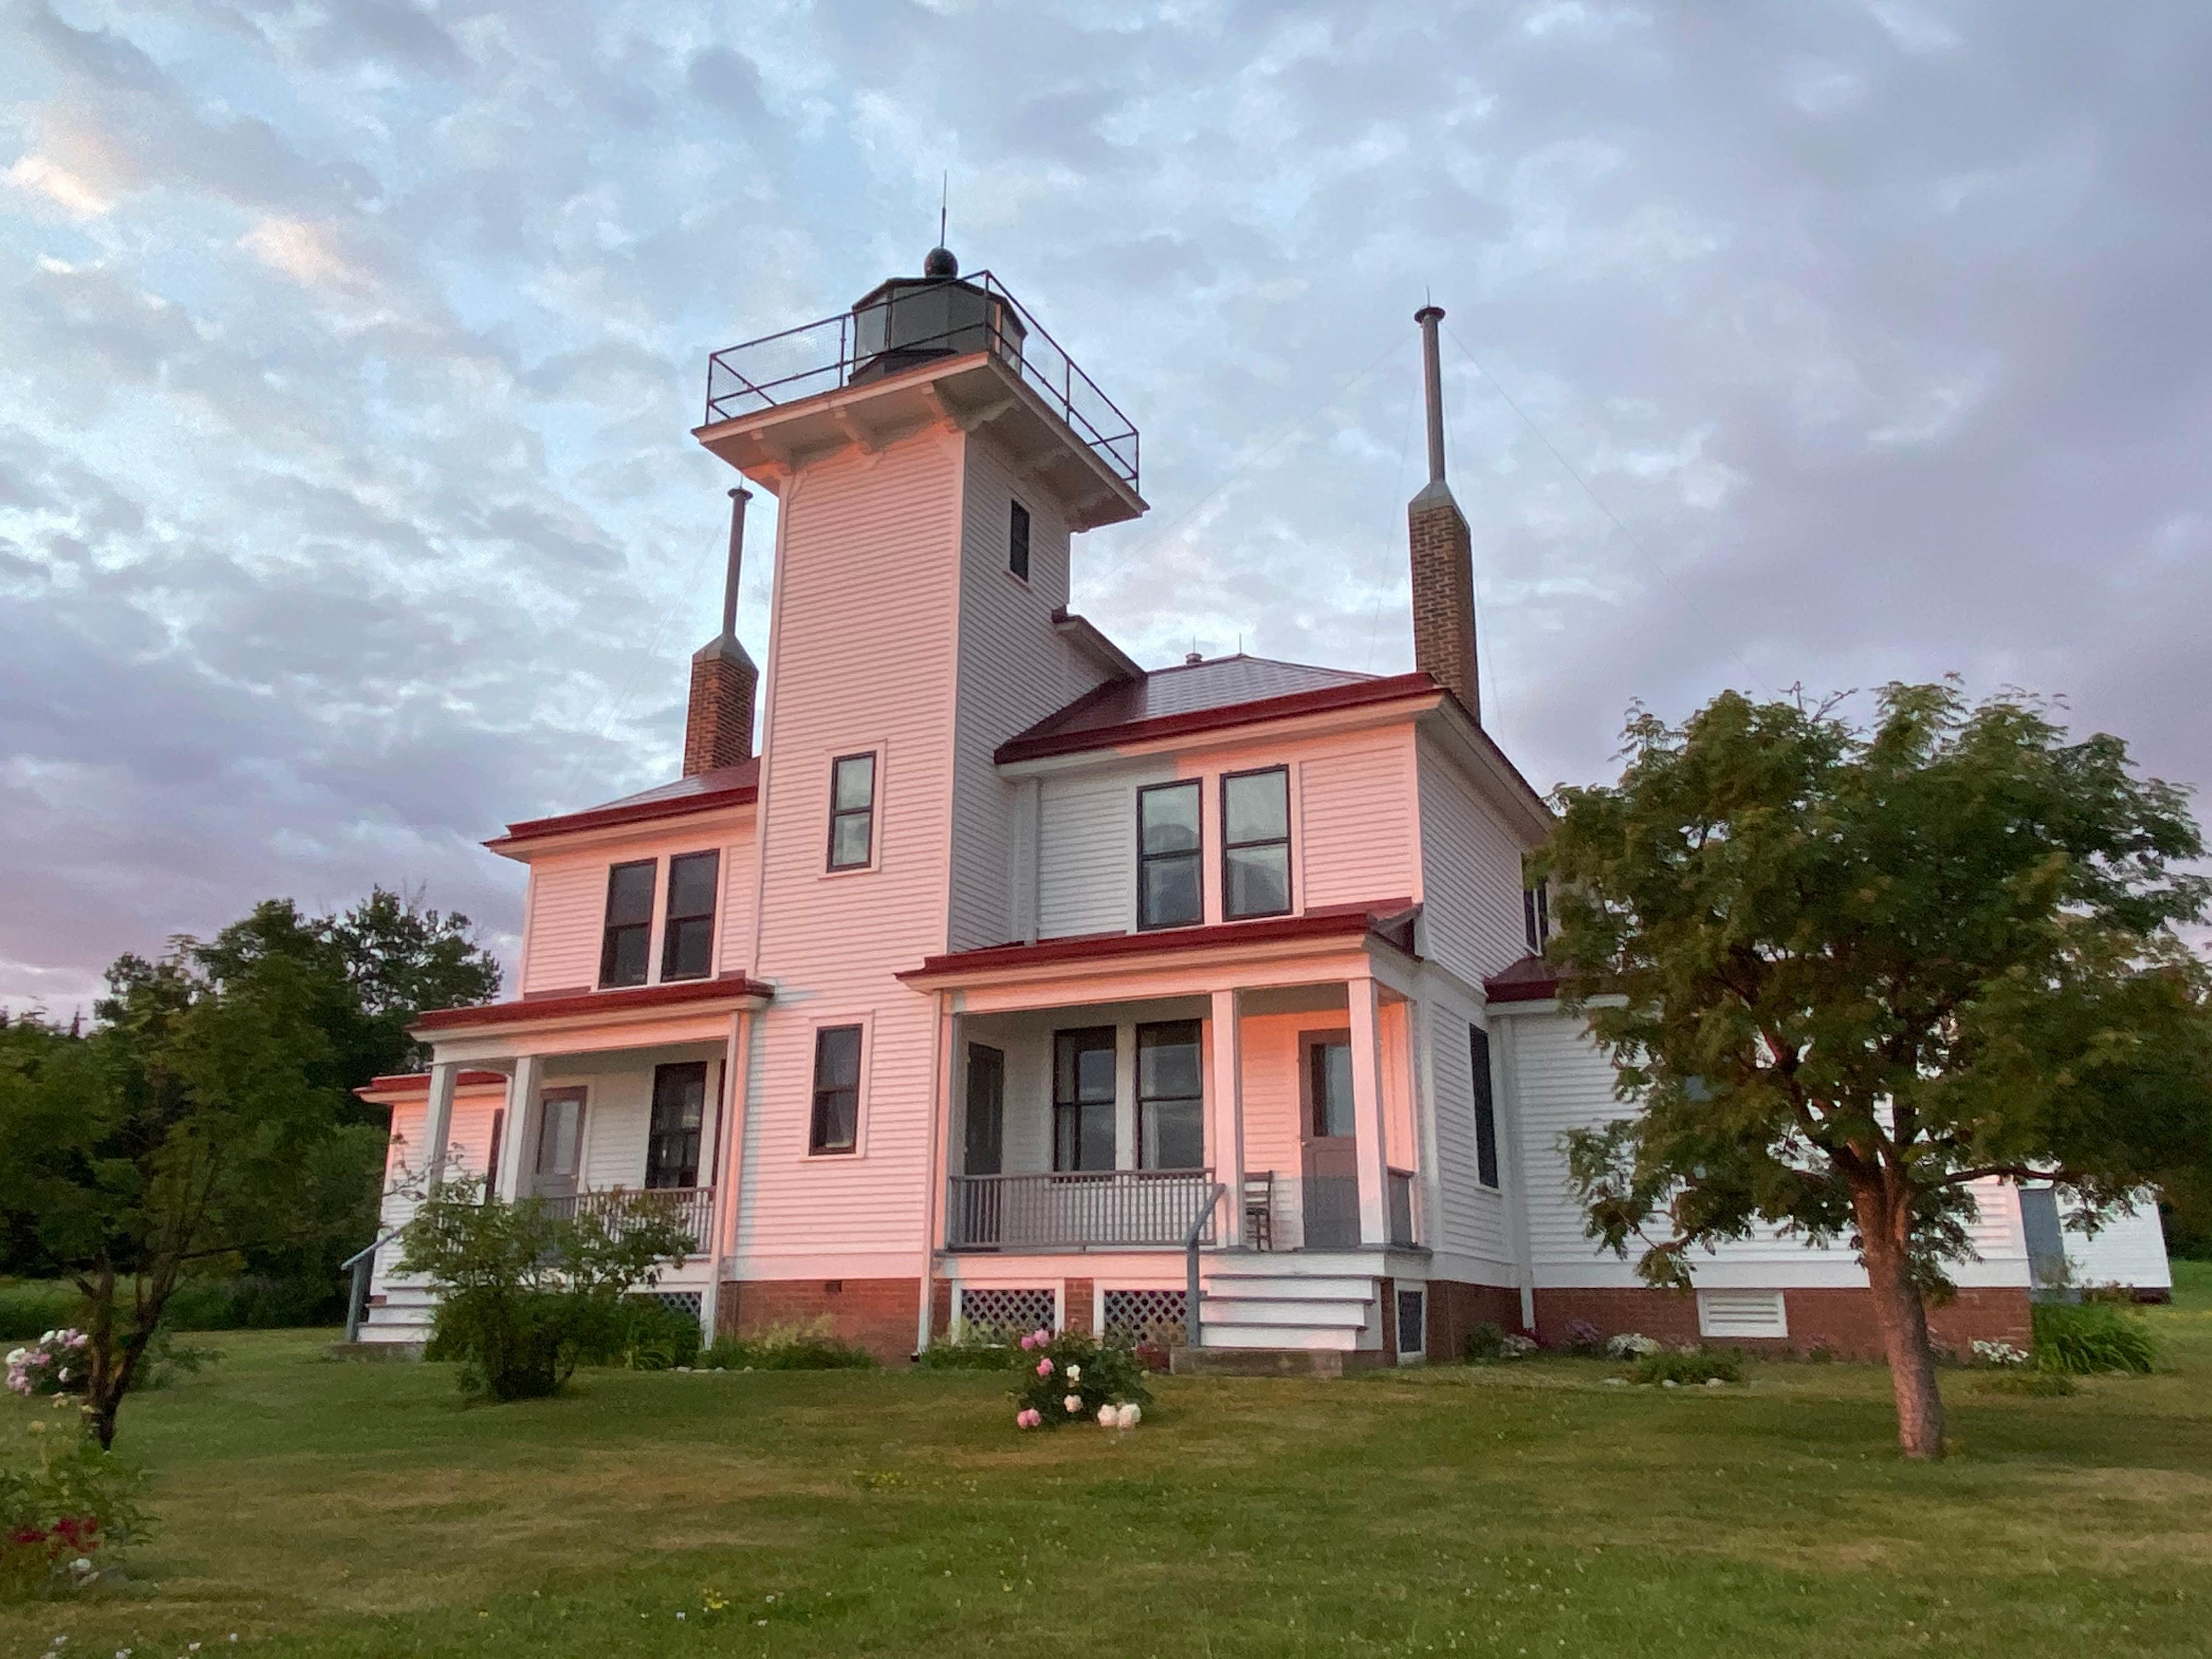 A two story white house with a light tower in the middle, reflects the colors of the setting sun.